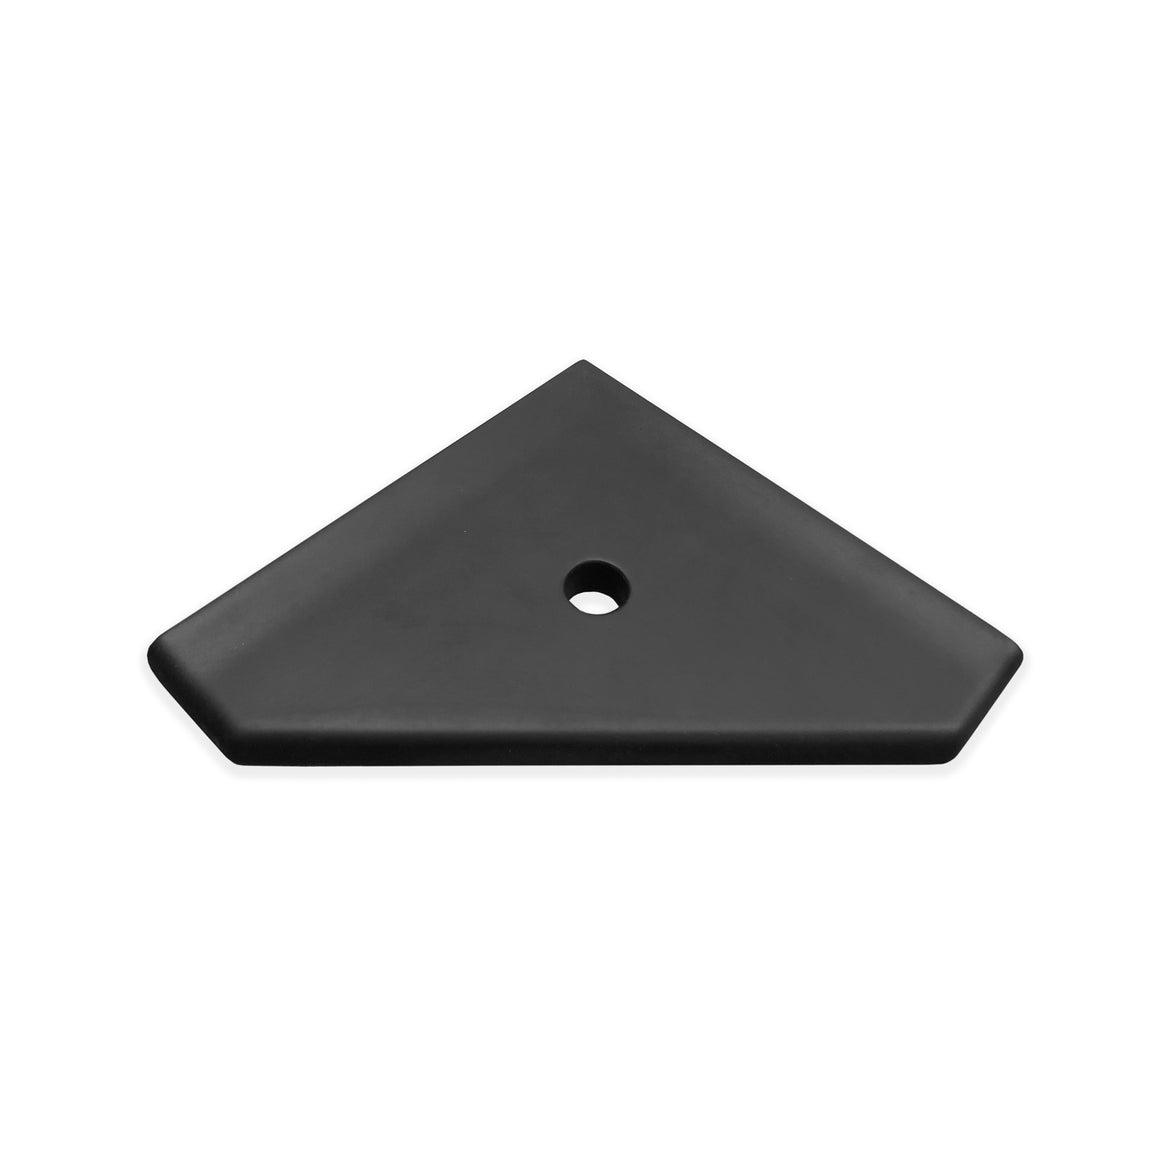 8" Matte Black Ceramic Corner Shelf Elegant Shower Shelf with a Drain Hole (Two sided Tapes Included) - Marble Barn